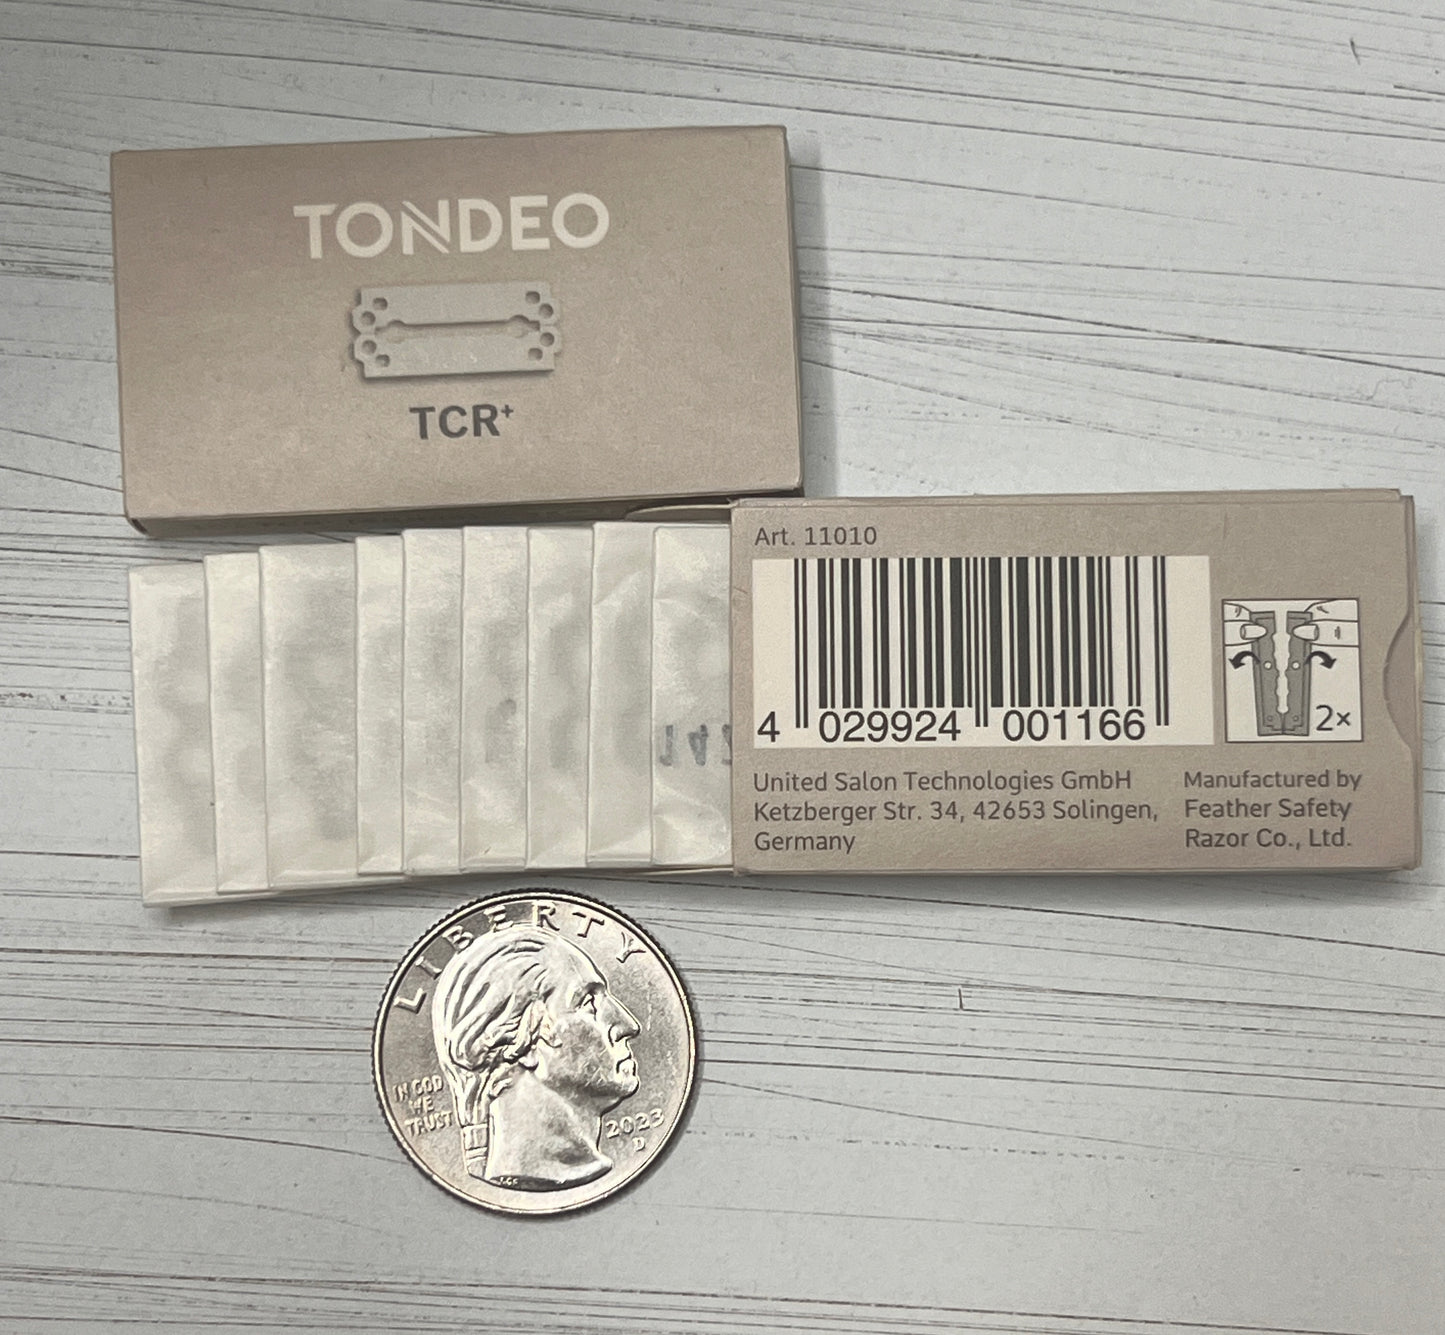 TCR Replacement Blades (10 packs of 10 blades)